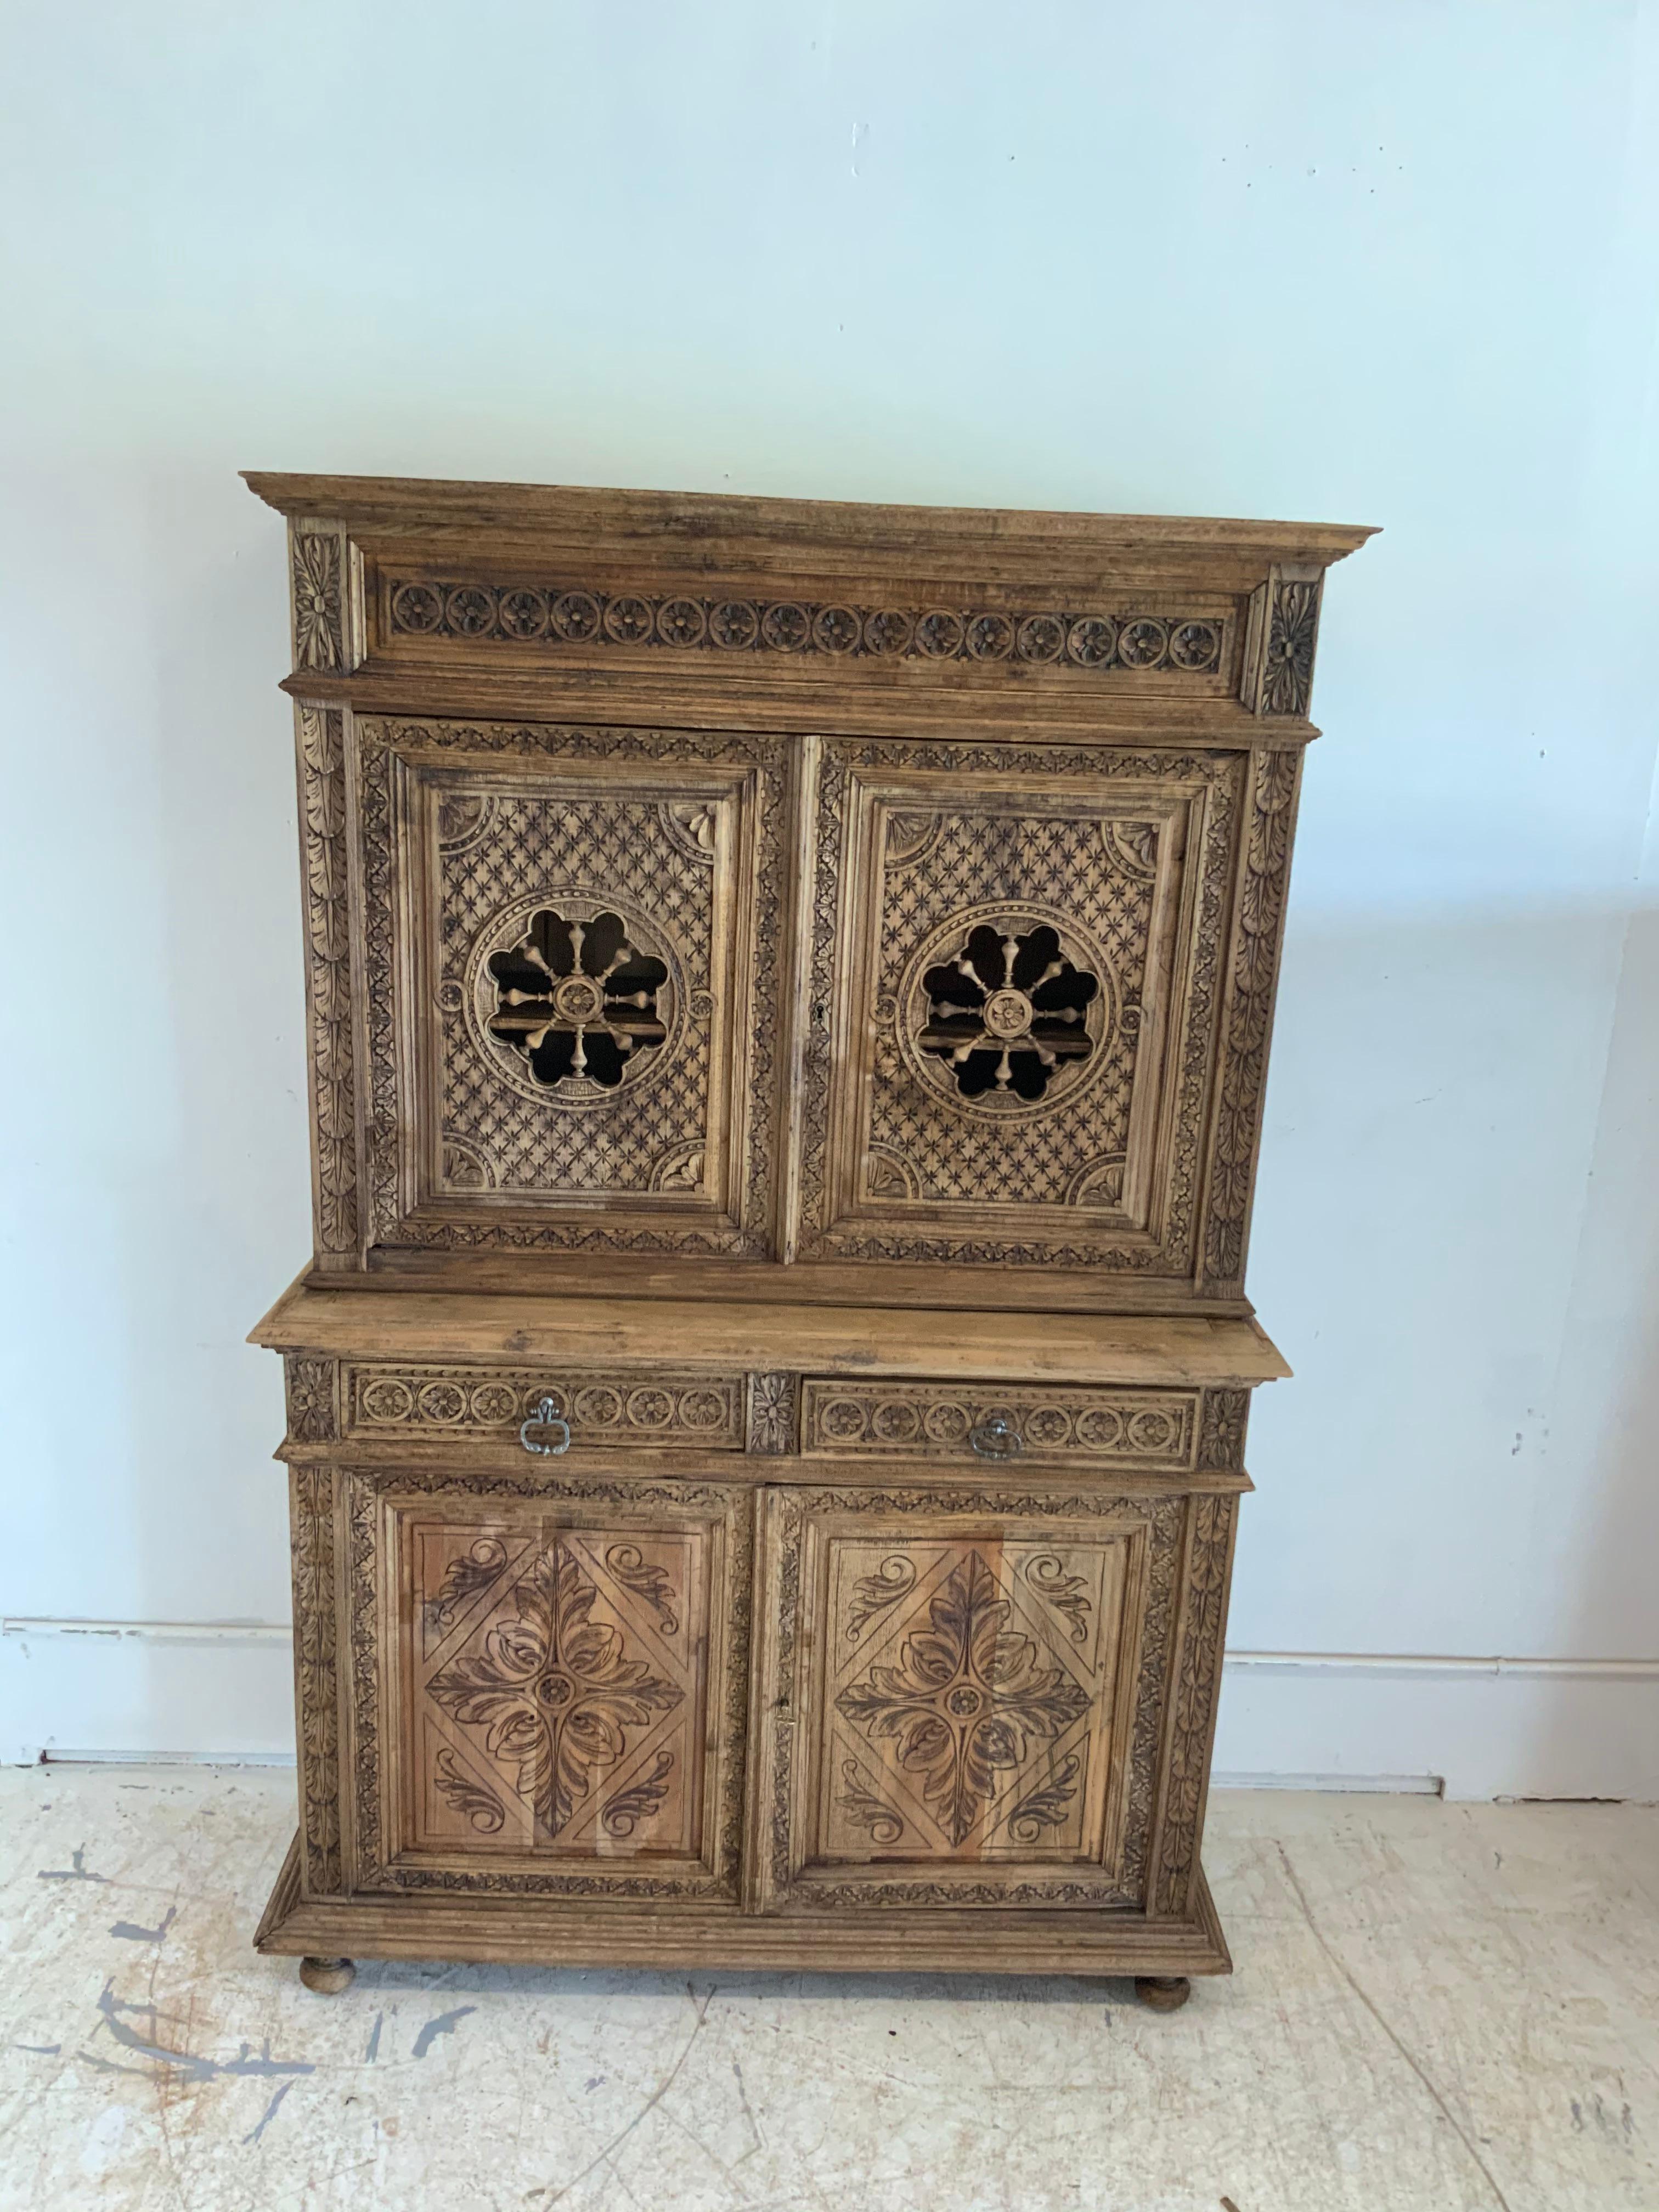 French antique cabinet deux-corps Normandy Henry II style bleached and in walnut wood with 2 doors in the top and 2 doors plus 2 drawers with dove tails on the bottom from late 19th century.